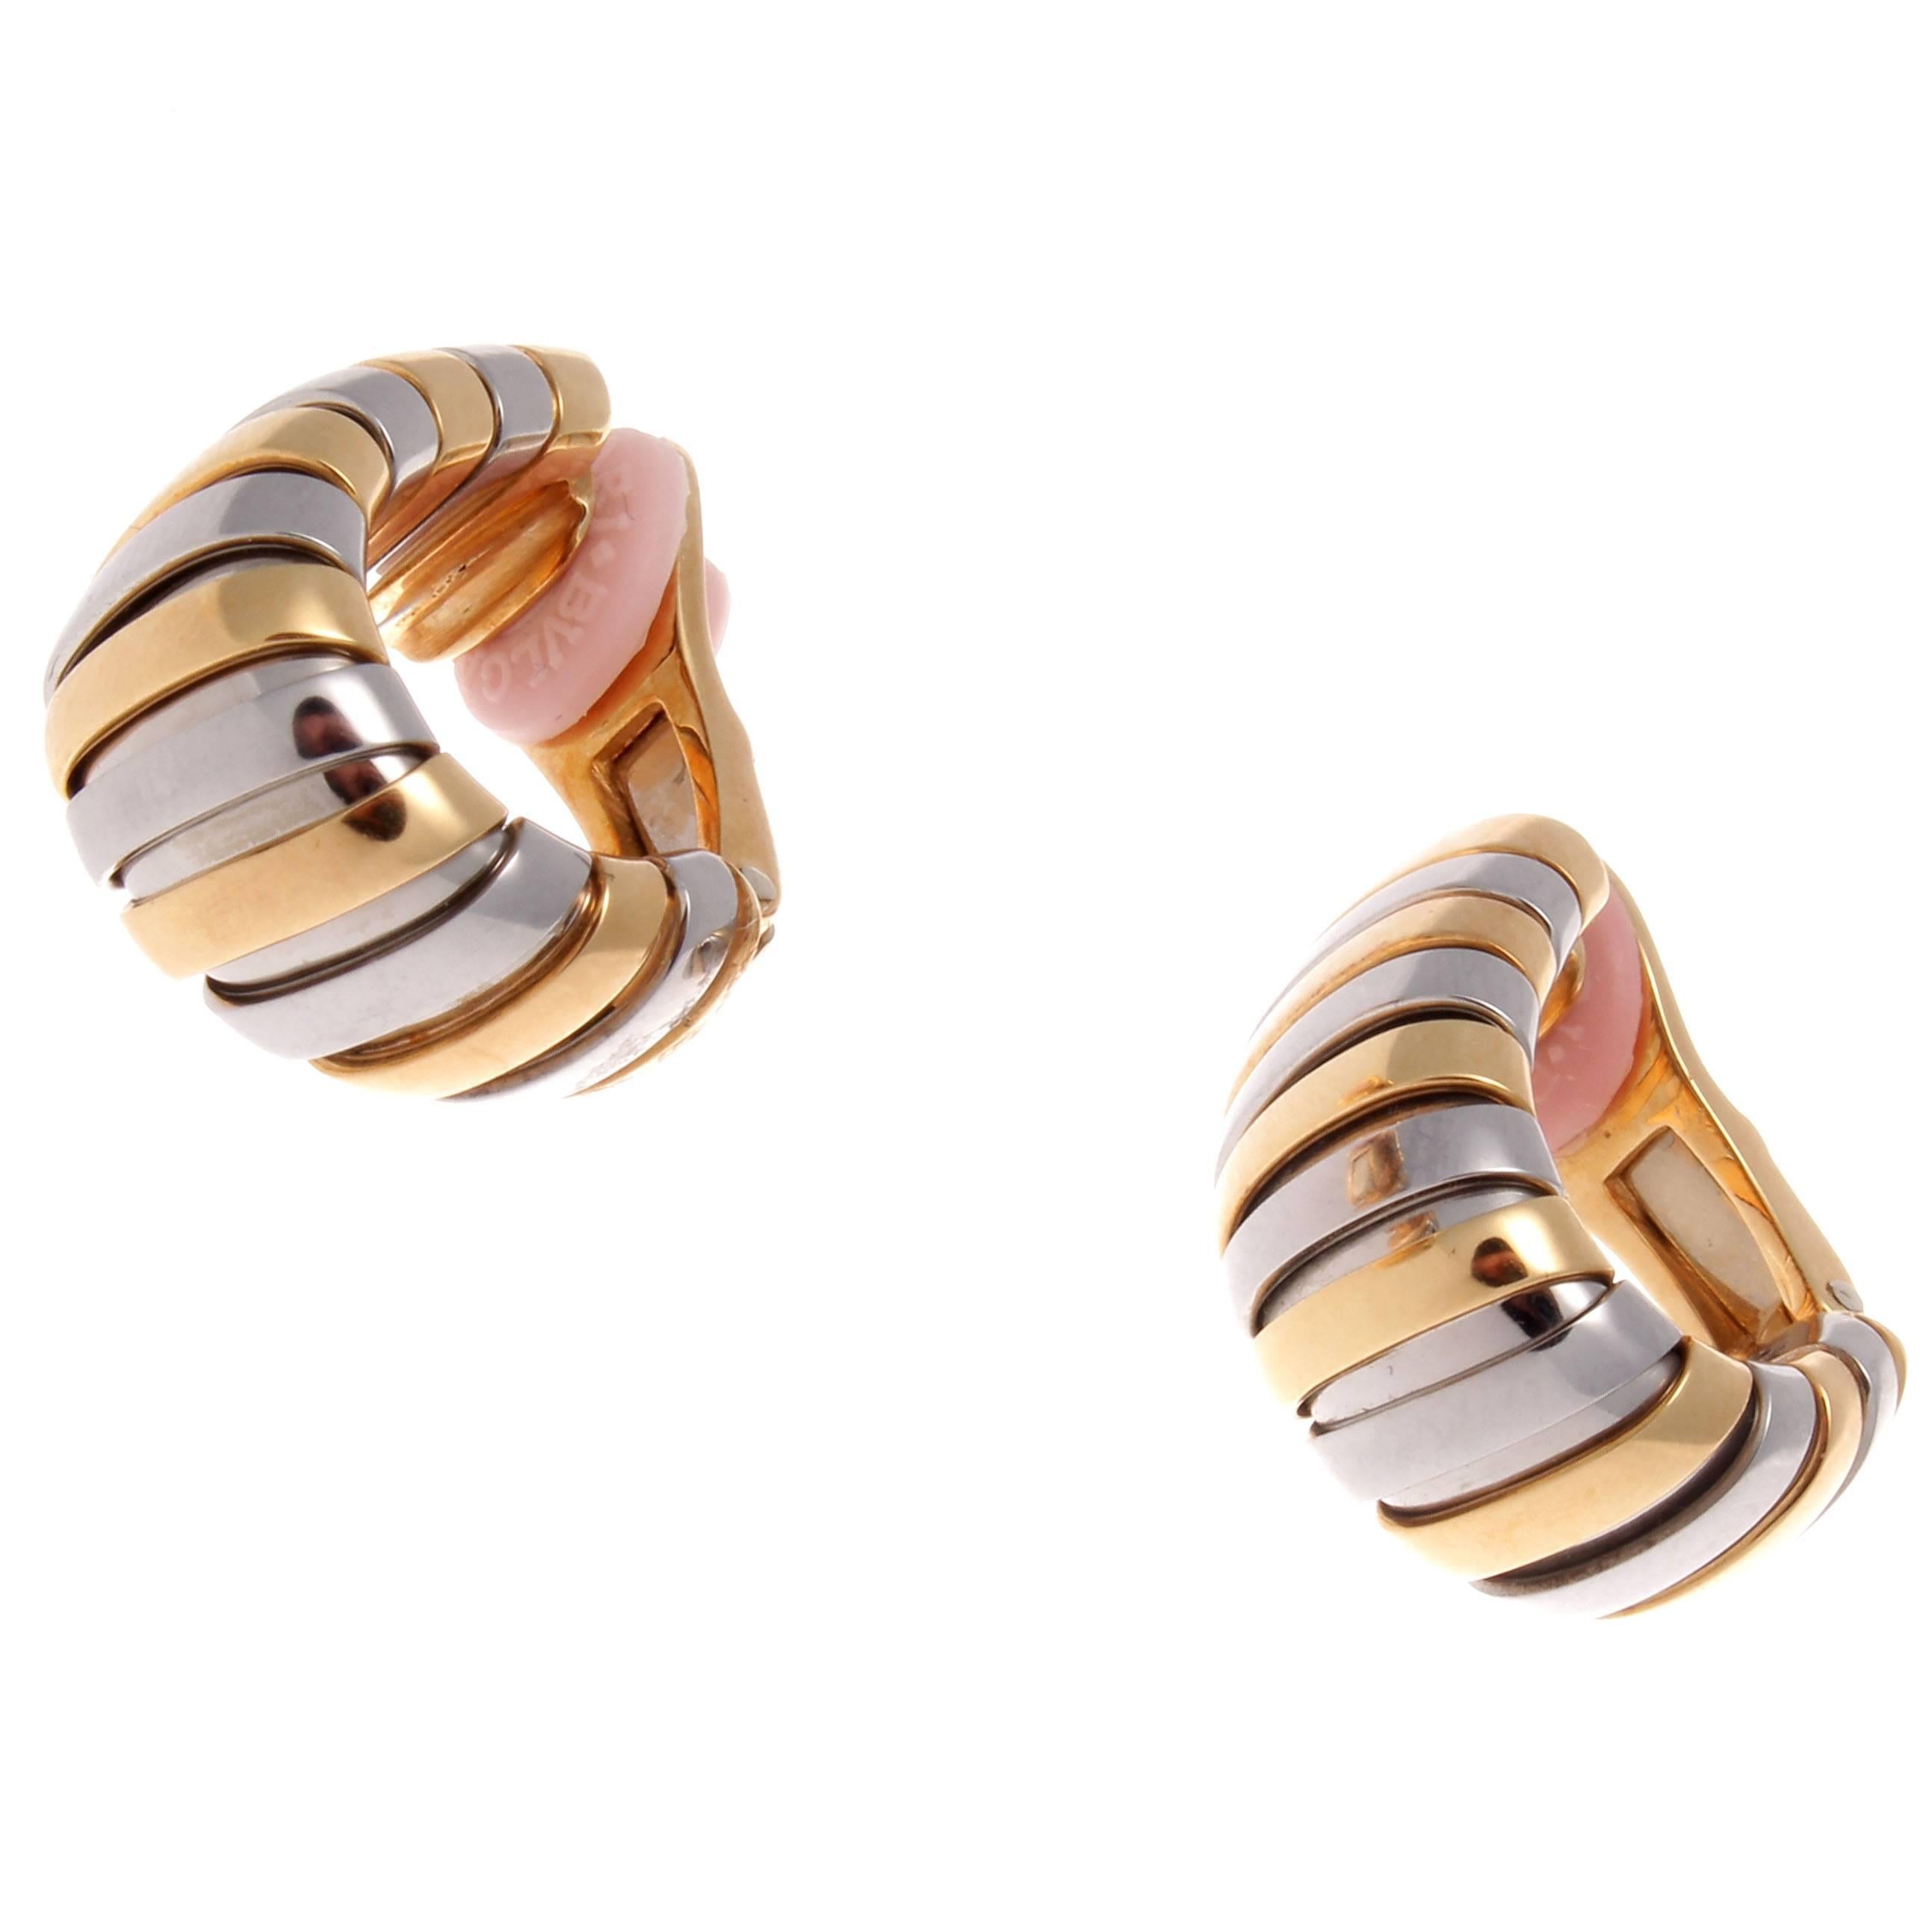 Bulgari's fascination with color and design has been transparent through all their creations. Designed with rolling contours of alternating stainless steel and glistening 18k yellow gold. Signed Bulgari.